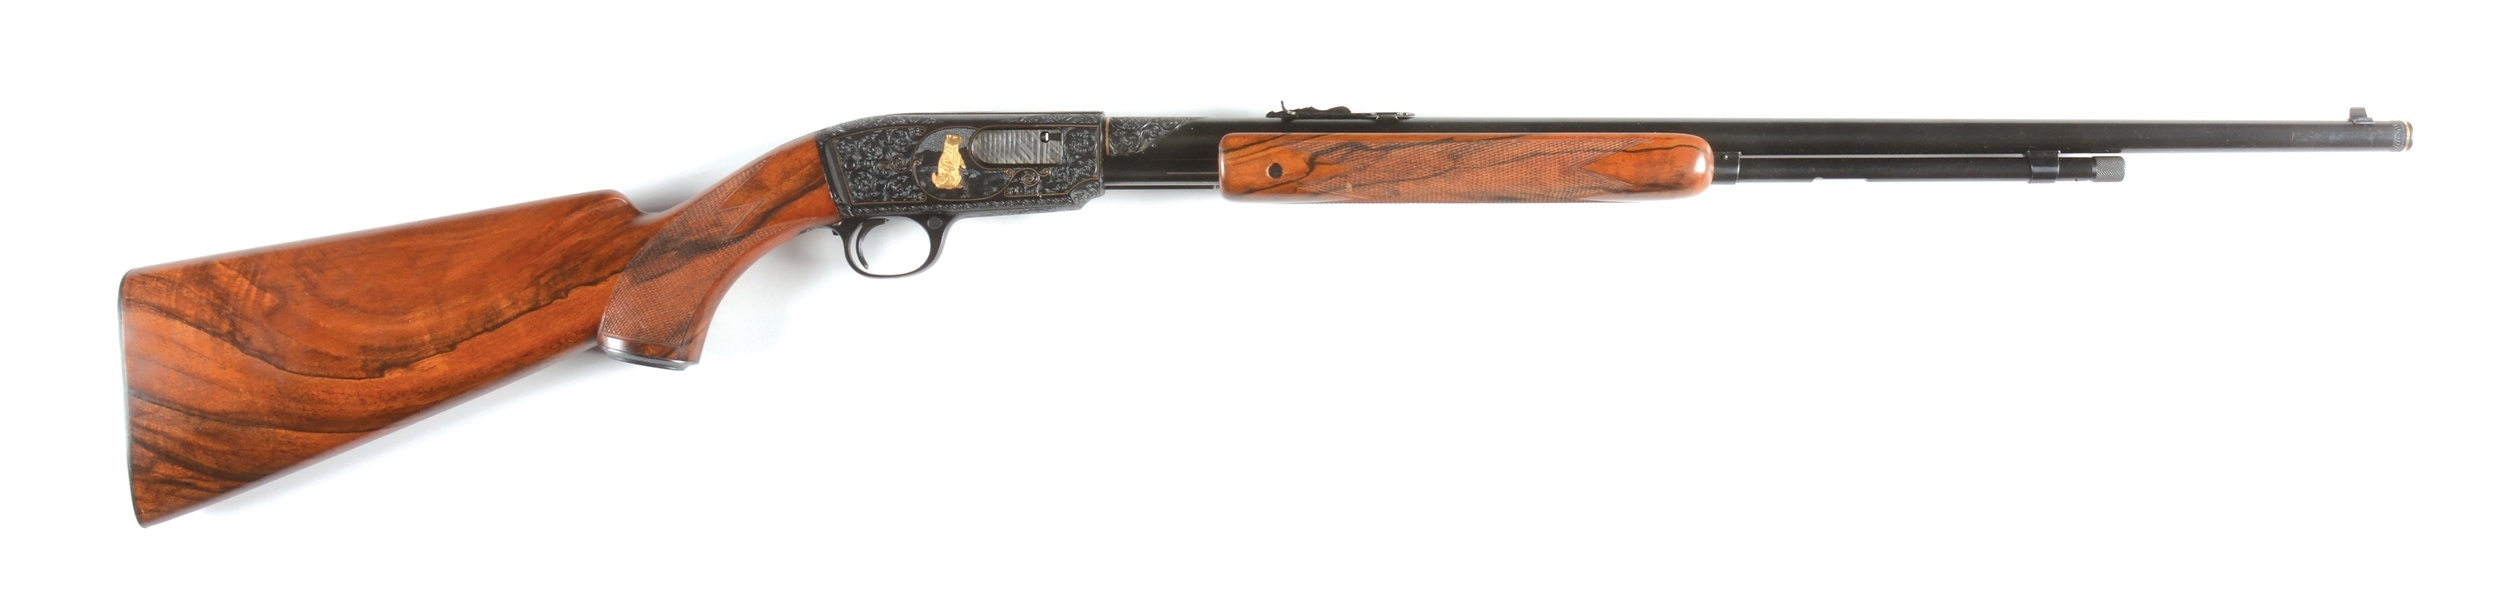 (C) WINCHESTER 61 SLIDE ACTION RIFLE (1956).